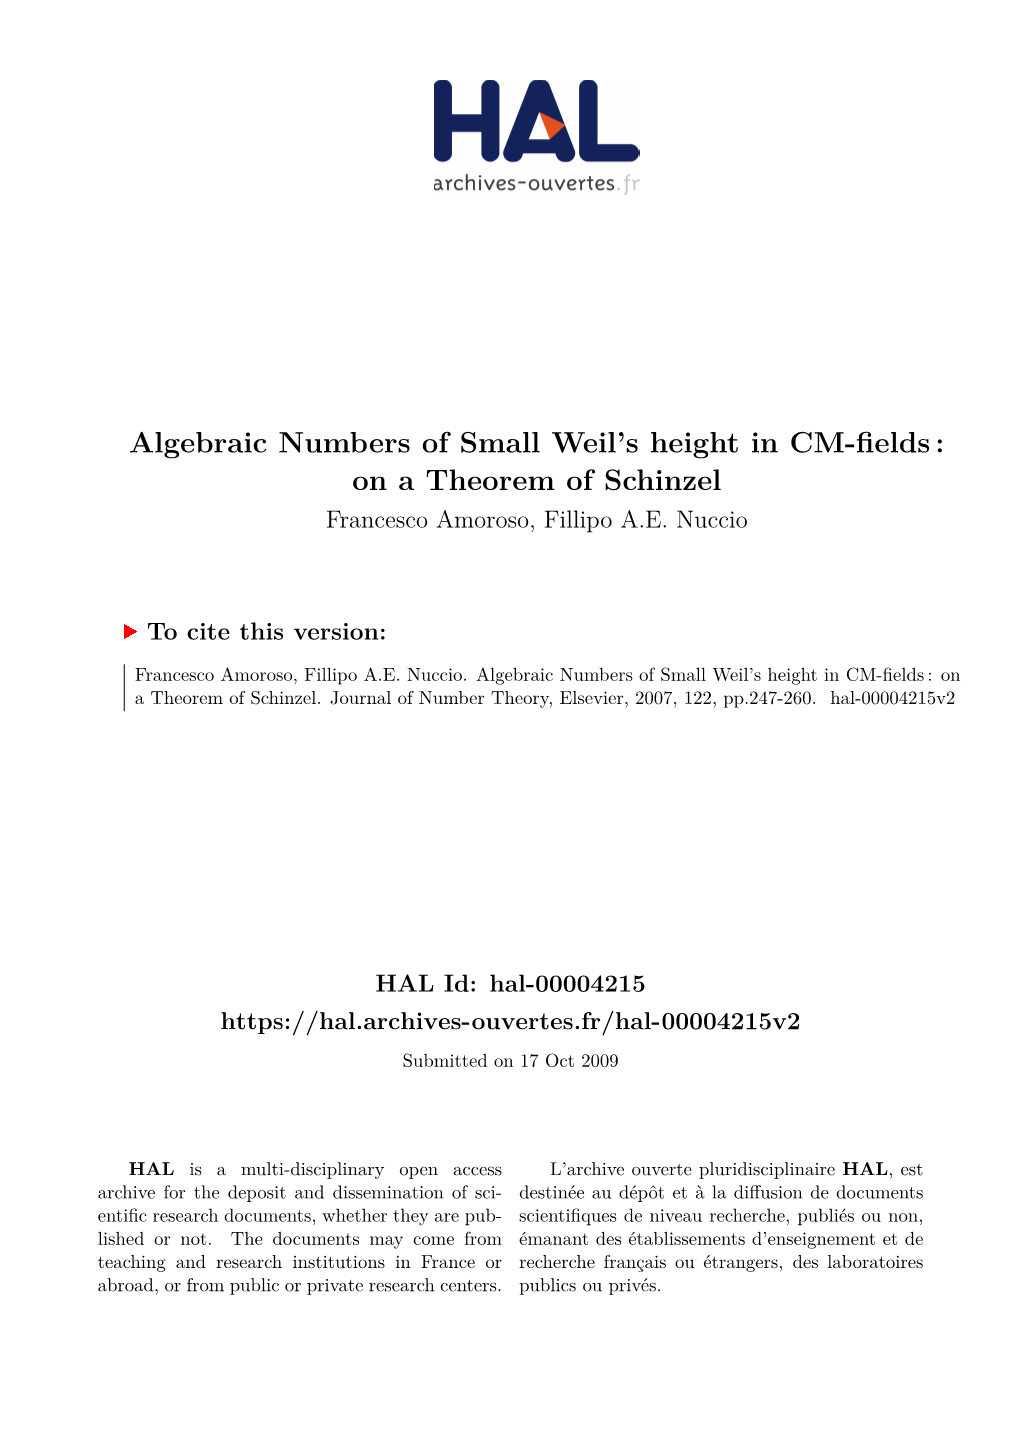 Algebraic Numbers of Small Weil's Height in CM-Fields: on a Theorem